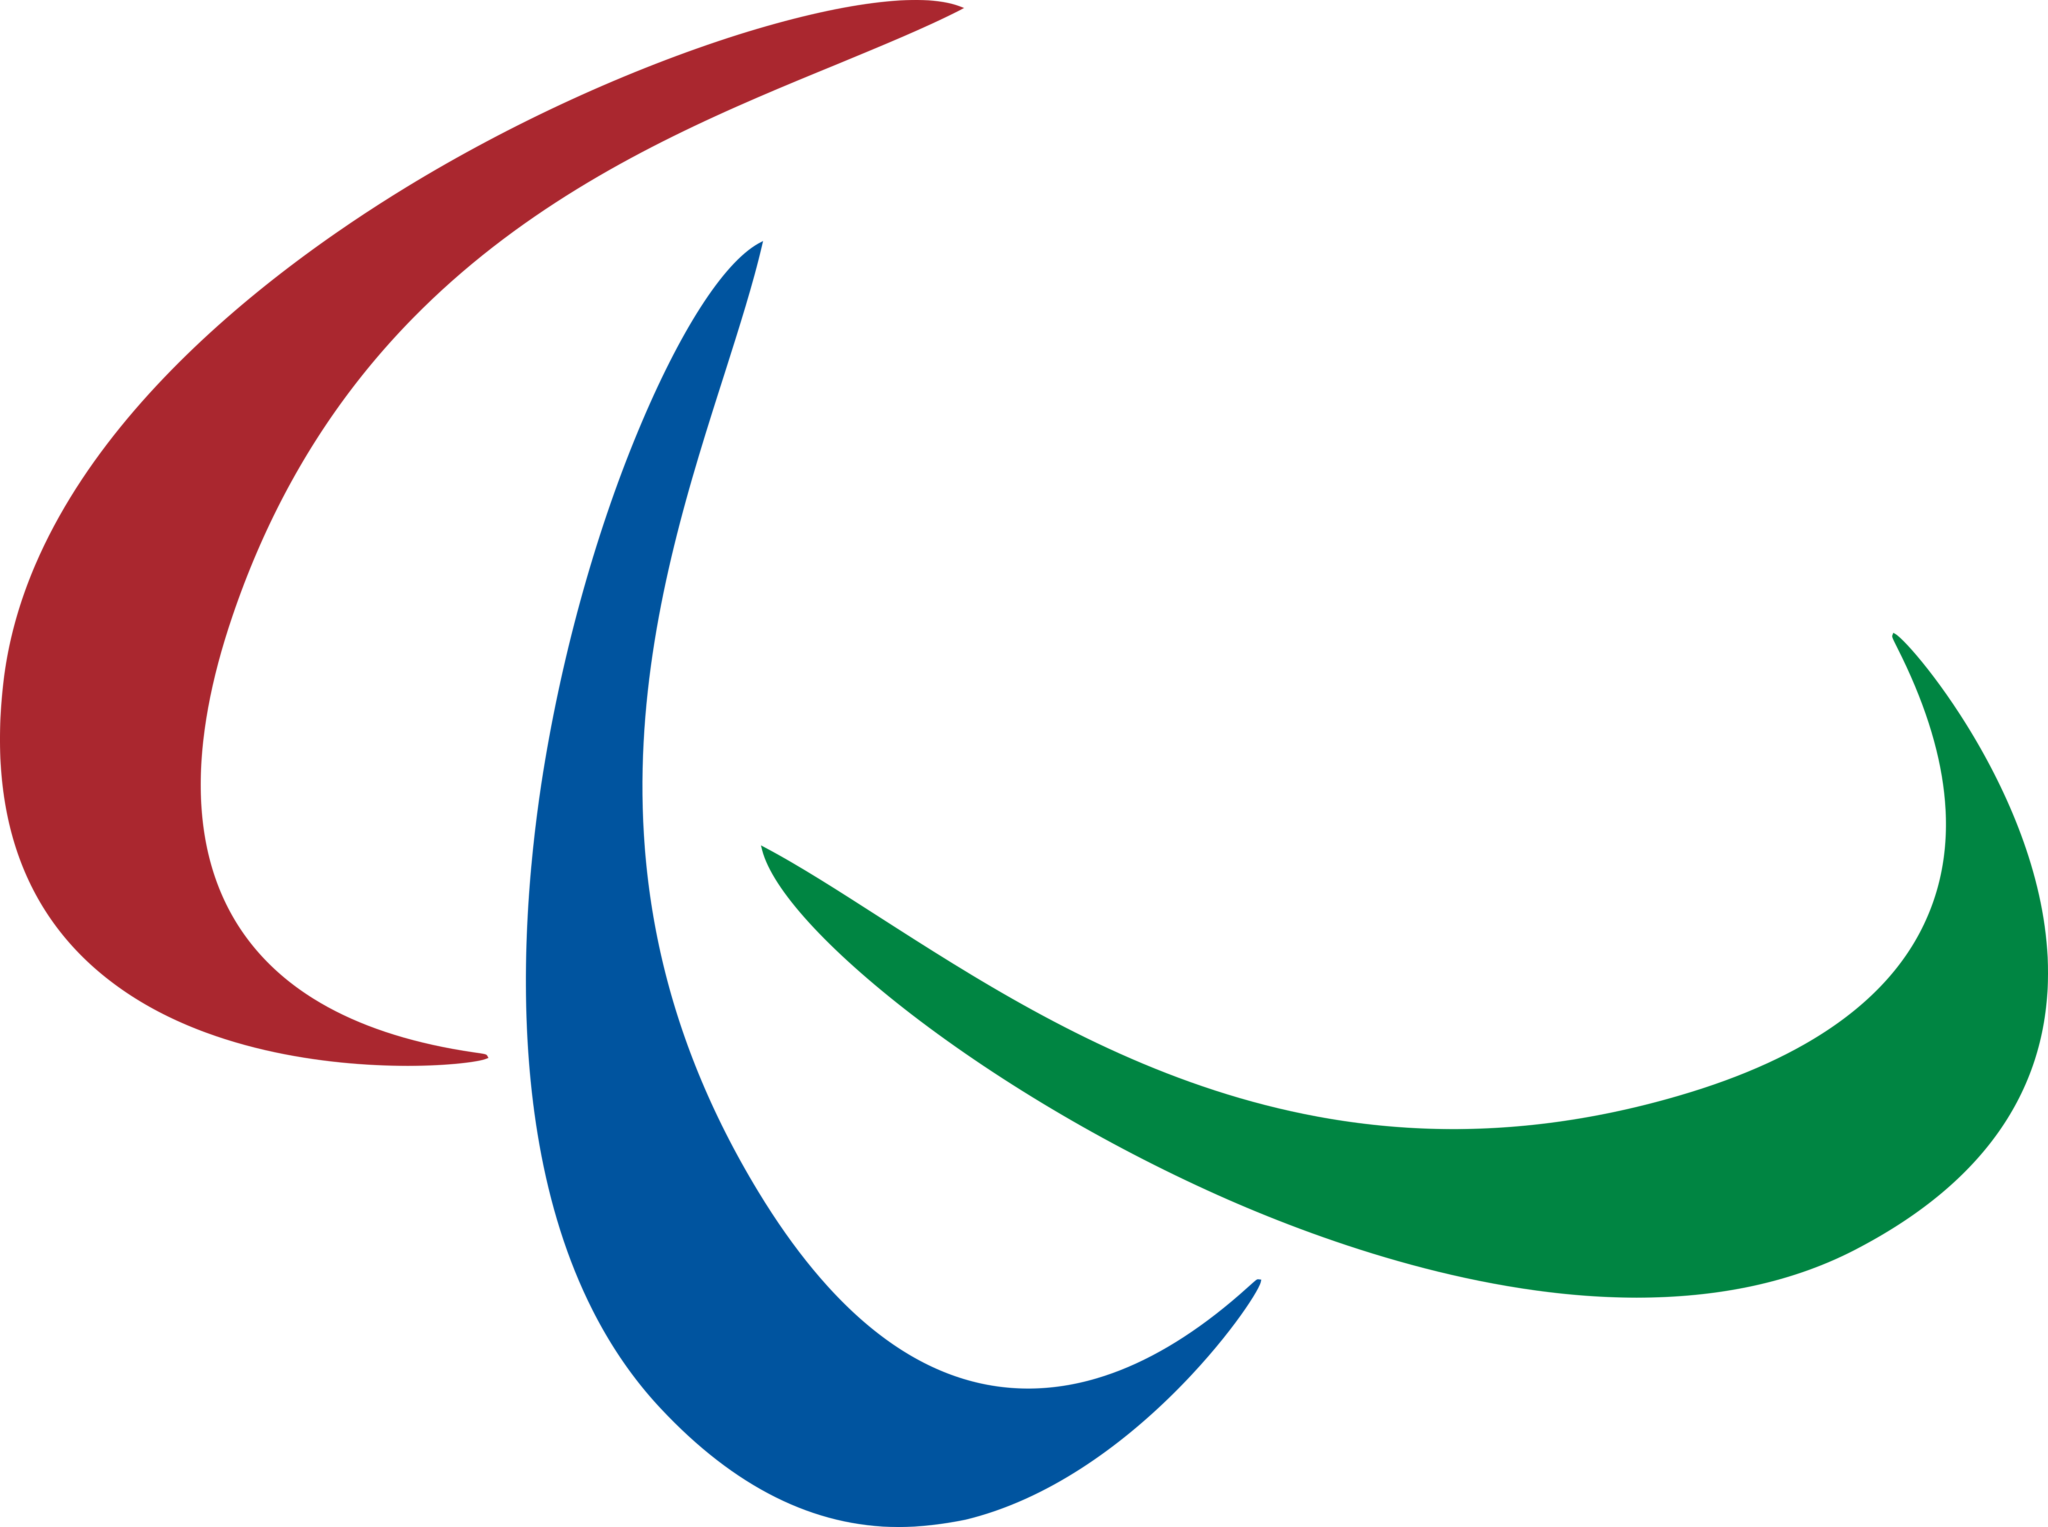 Paralympic Games Logo 2004 2048x1527 